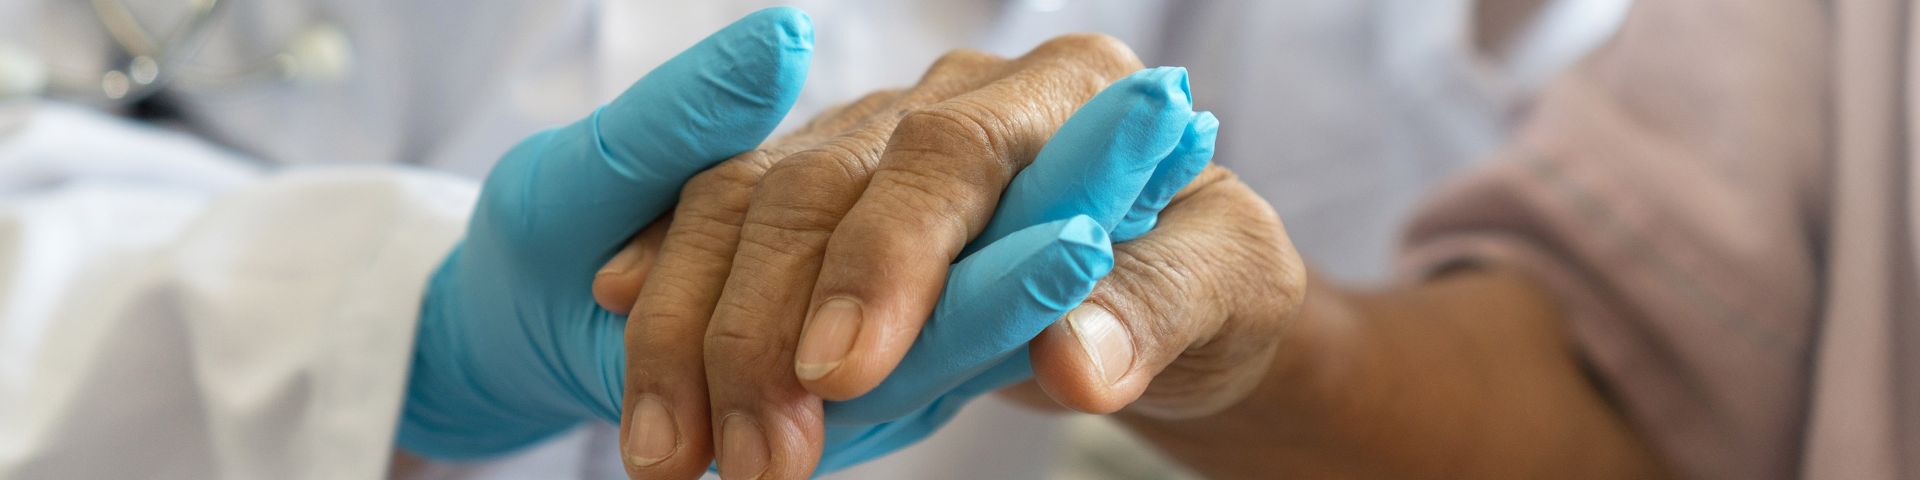 A doctor wearing gloves holds a patient's hand.